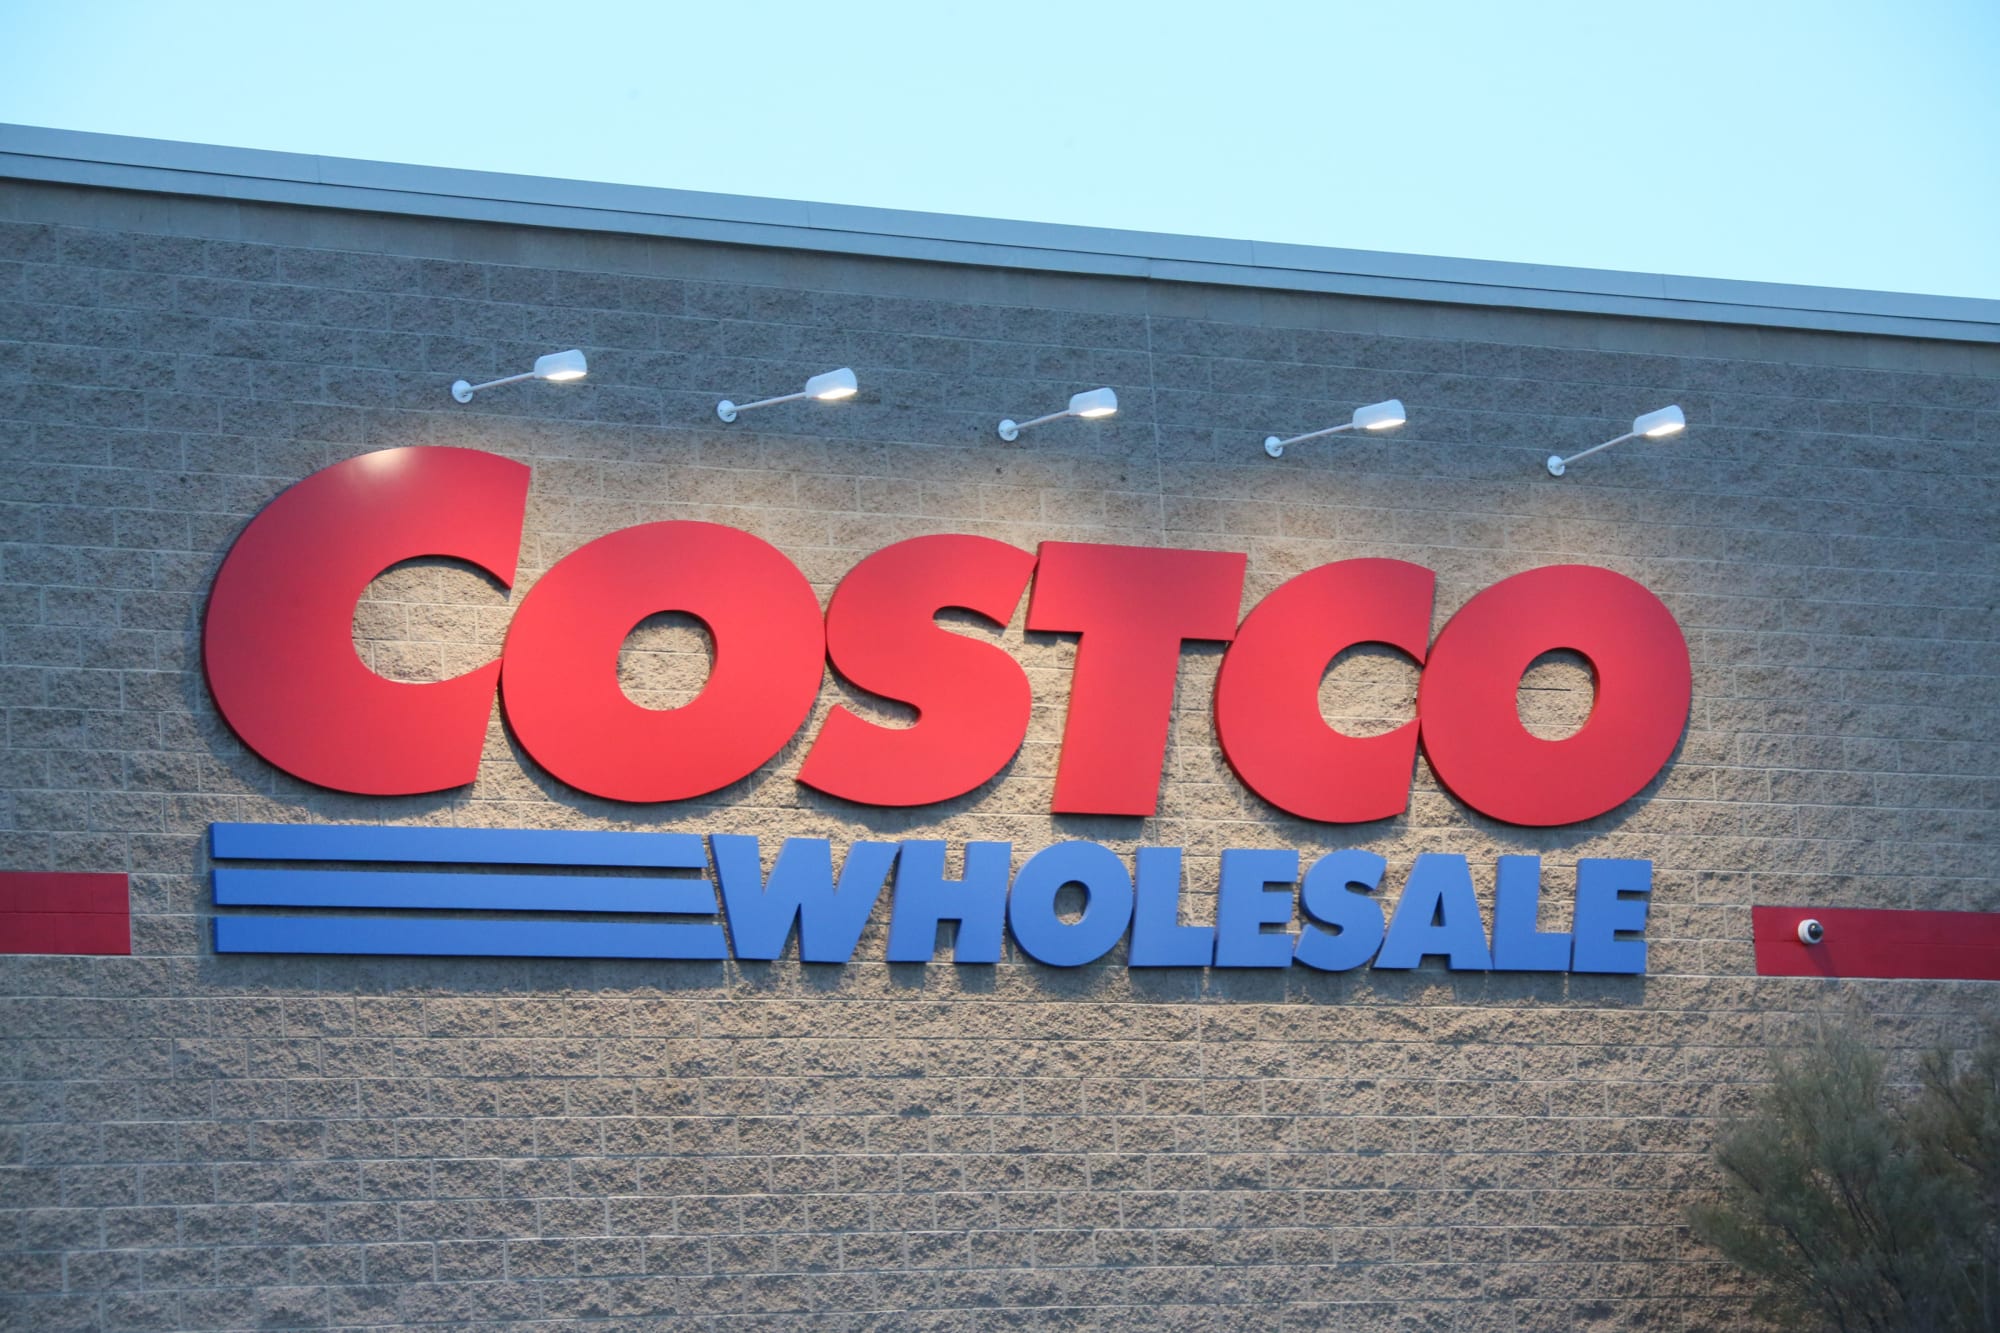 Is Costco open on the Fourth of July (Independence Day)?